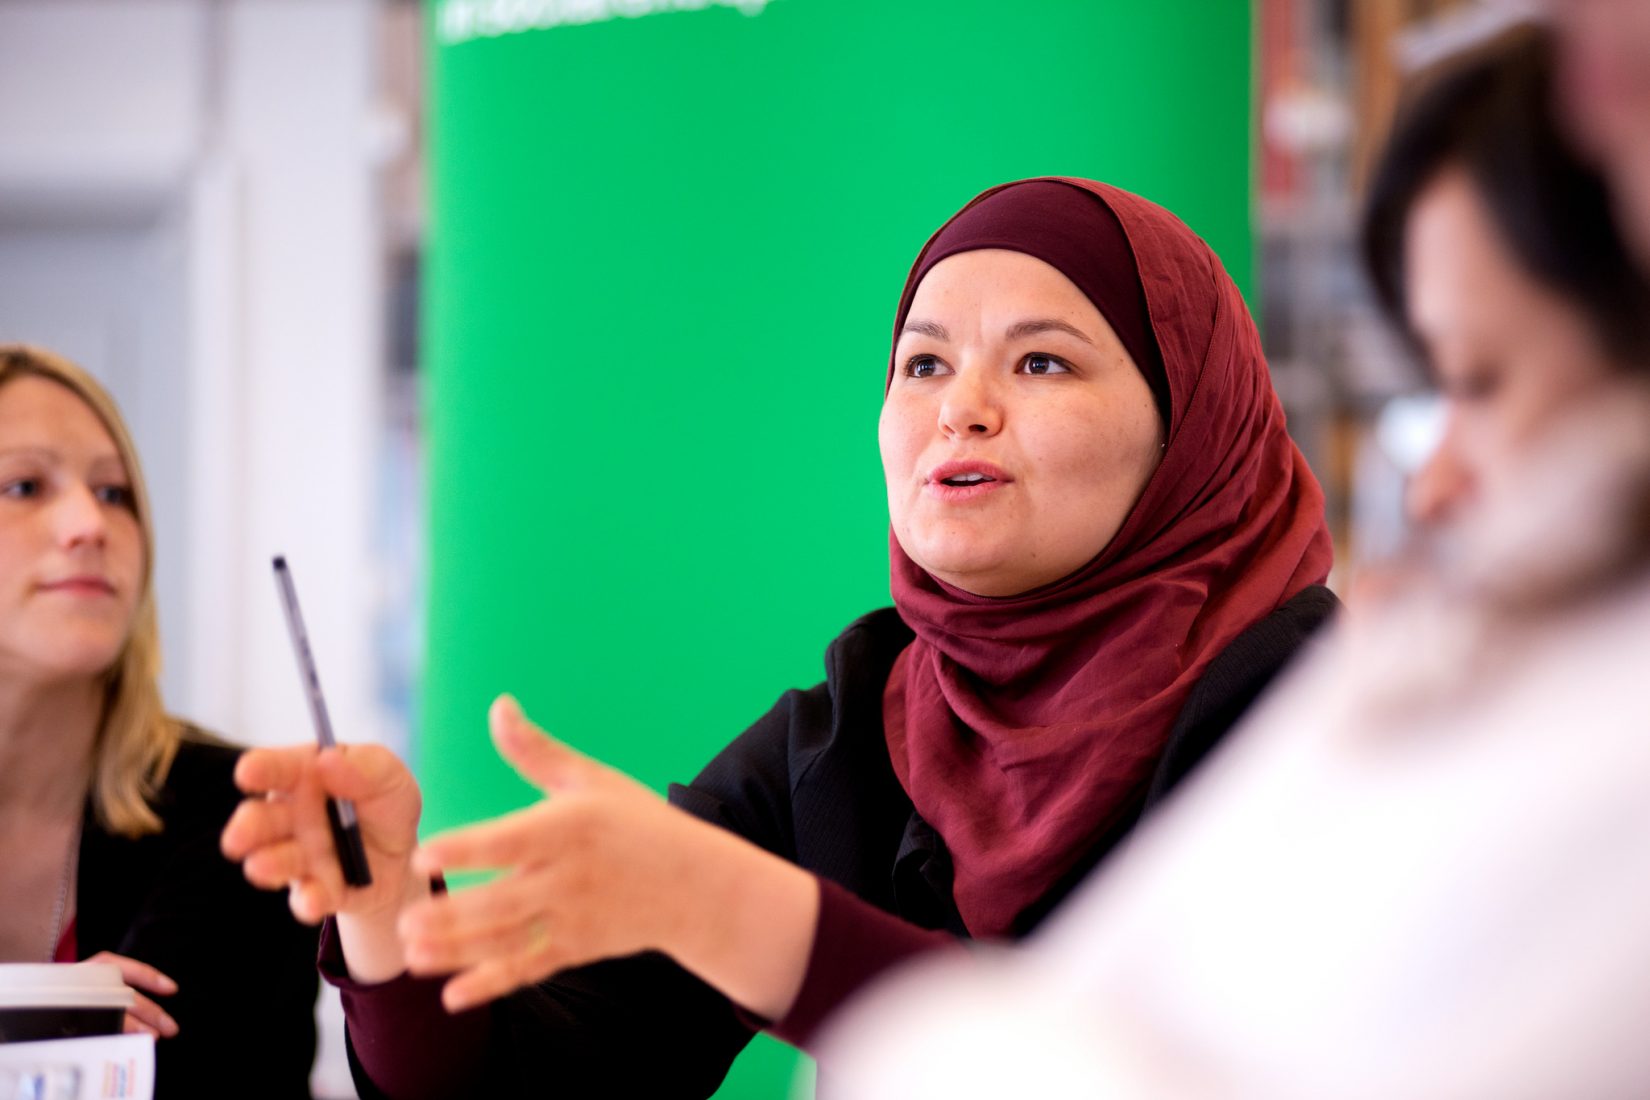 A woman in a red/brown hijab. She is standing infront of a green wall and is having a discussion with people outside of the picture.